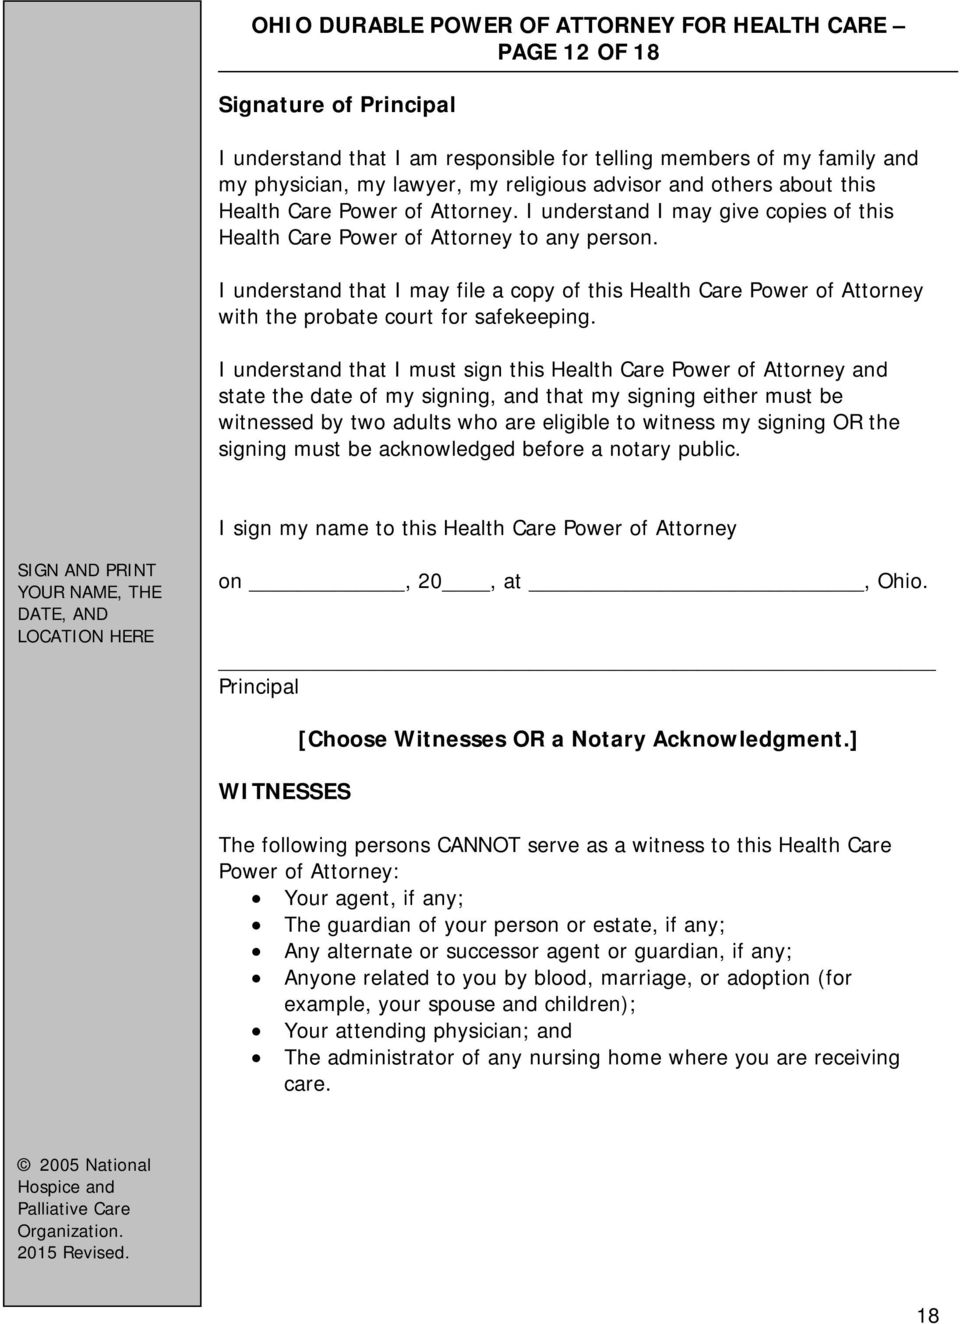 I understand that I may file a copy of this Health Care Power of Attorney with the probate court for safekeeping.